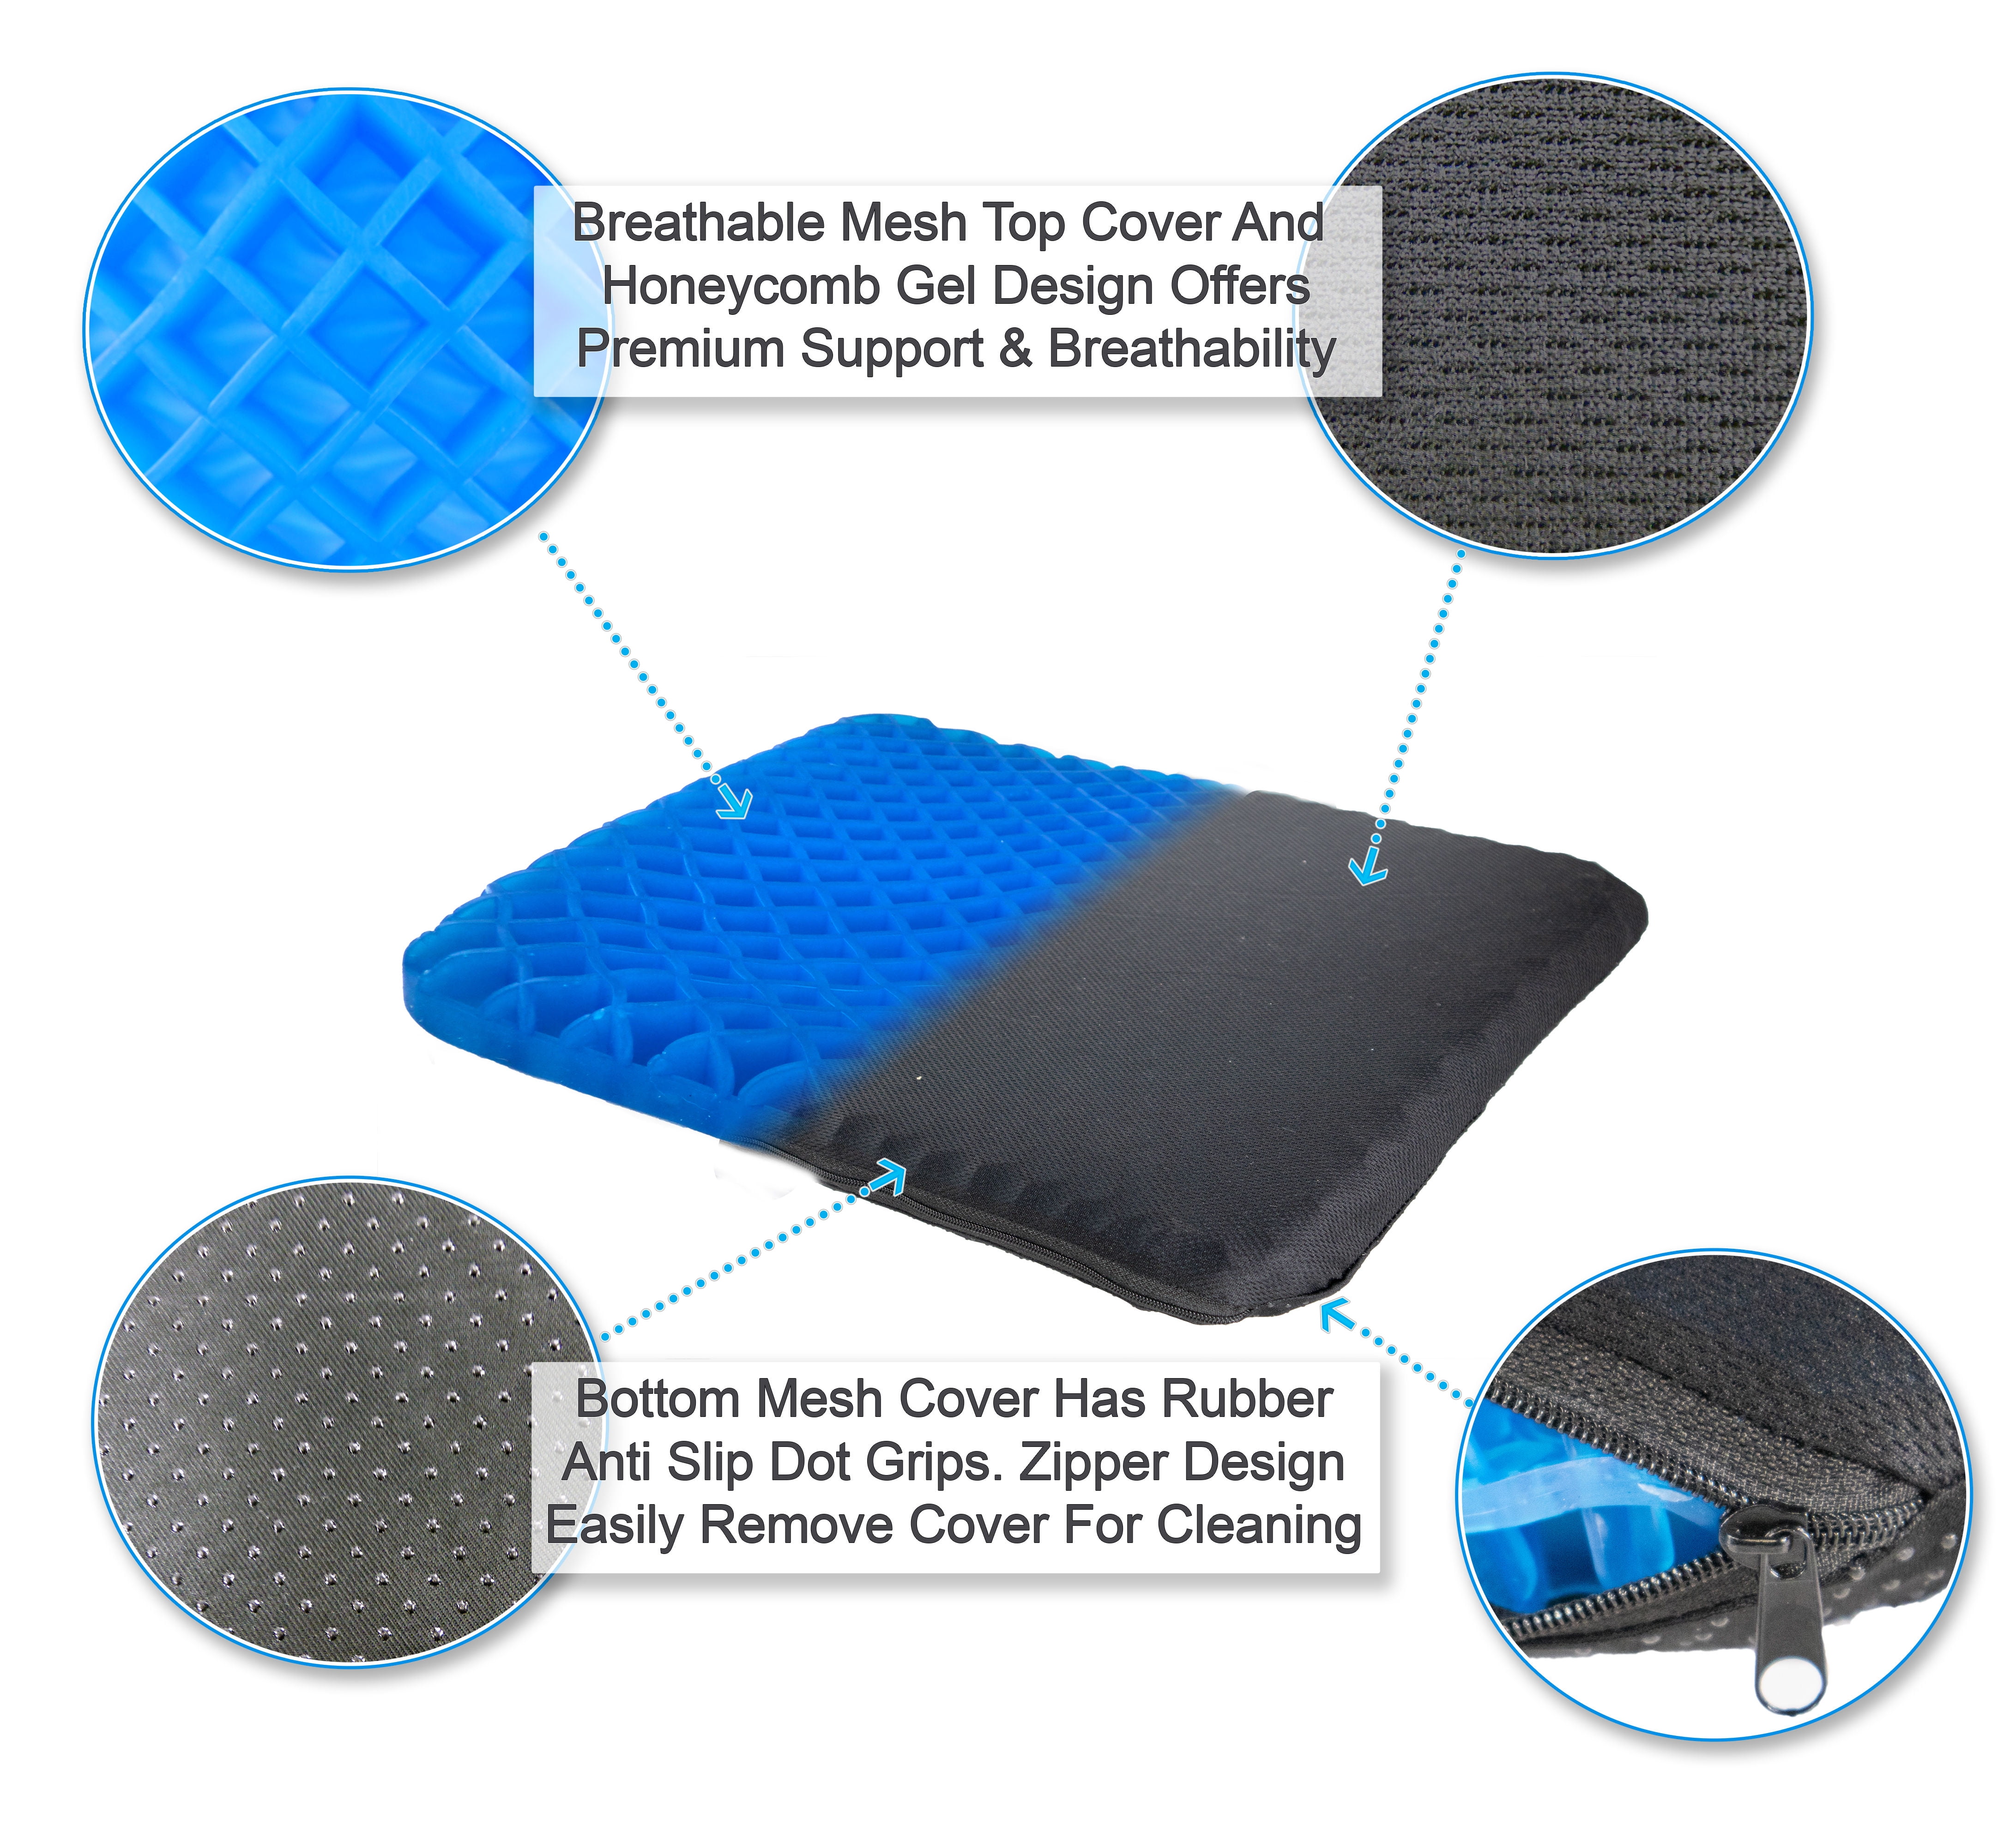 SCOMEE Foldable Gel Seat Cushion Breathable Honeycomb Design Absorbs Pressure Points Seat Cushion for Car Office Chair Cushion for Butt Long Sitting with Cover Wheelchair Chair Pad Beige 